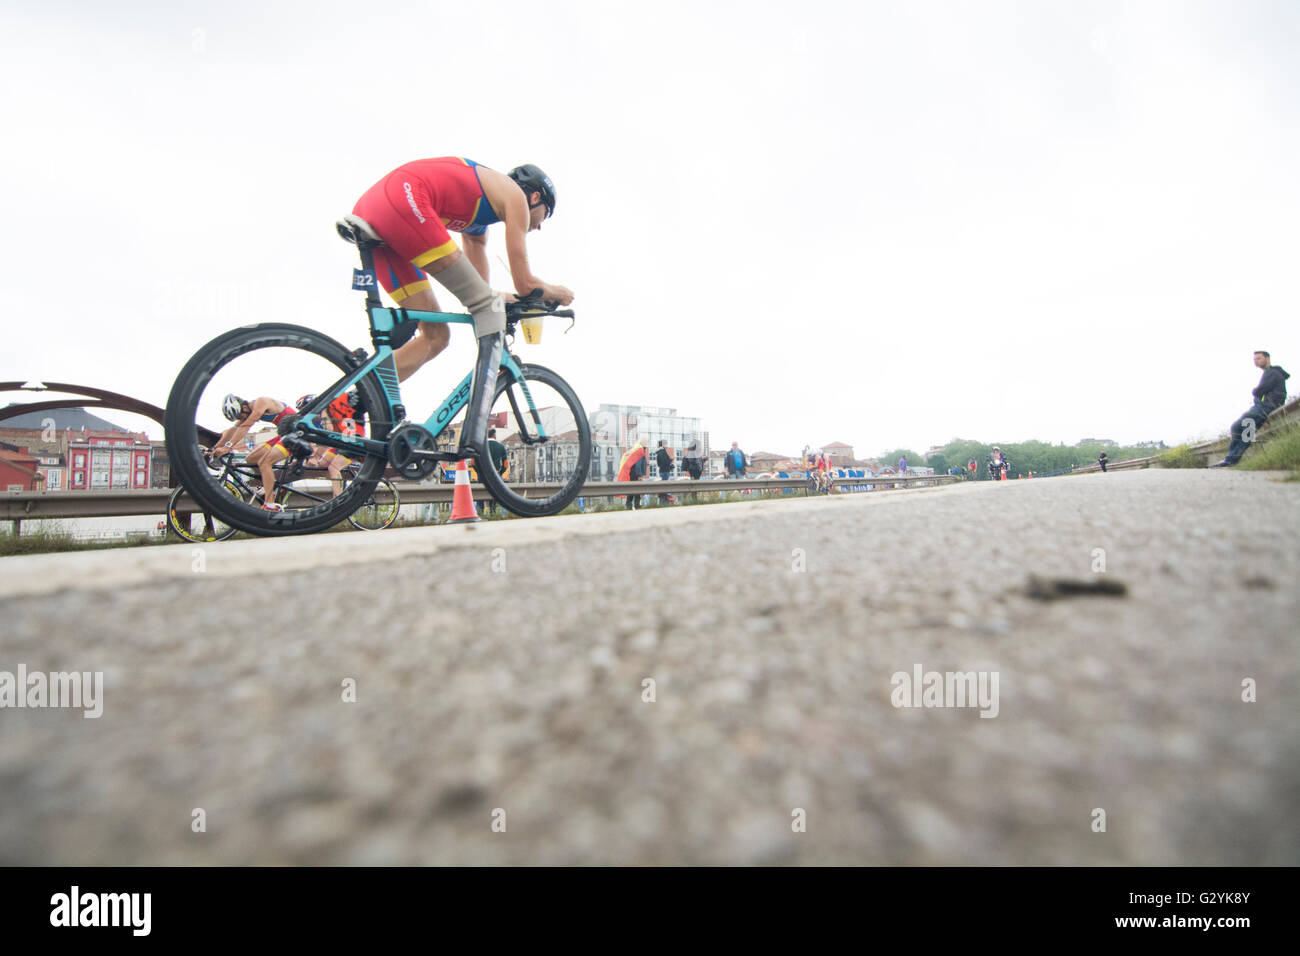 Aviles, Spain. 4th June, 2016. Athletes during the paradhuatlon category of 2016 Aviles ITU Duathlon World Championships at Center Niemeyer on June 4, 2016 in Aviles, Spain. Credit: David Gato/Alamy Live News Stock Photo